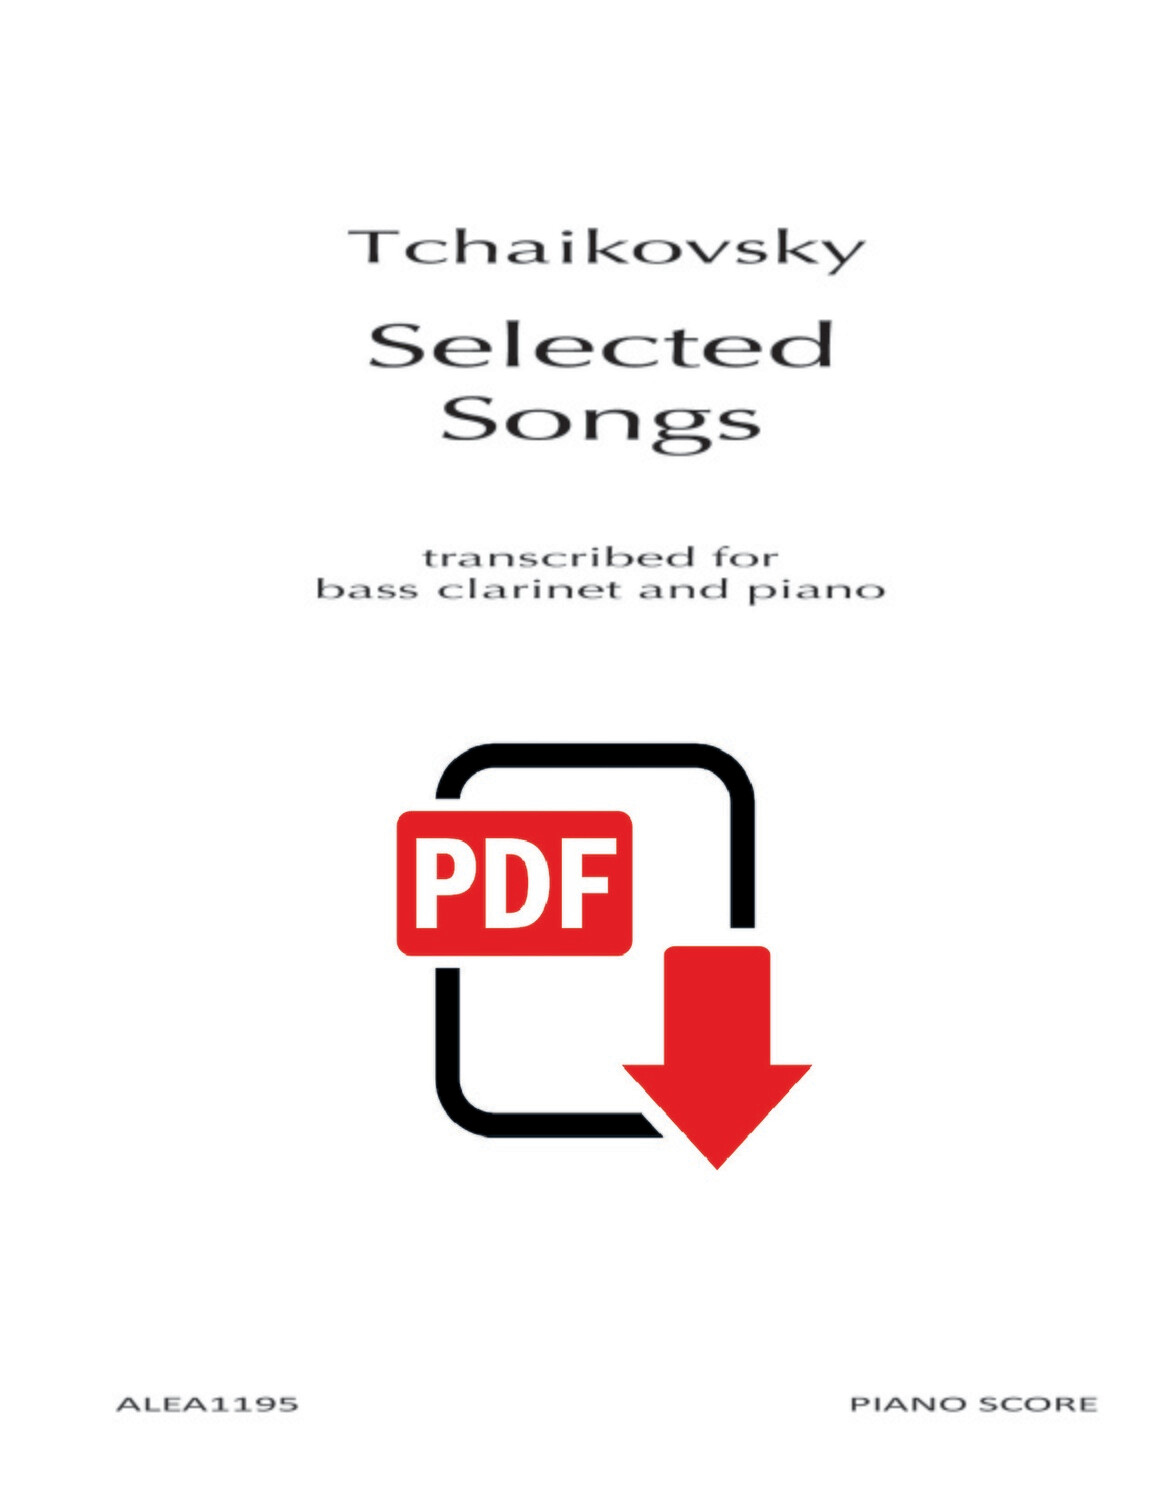 Tchaikovsky: Selected Songs (PDF)